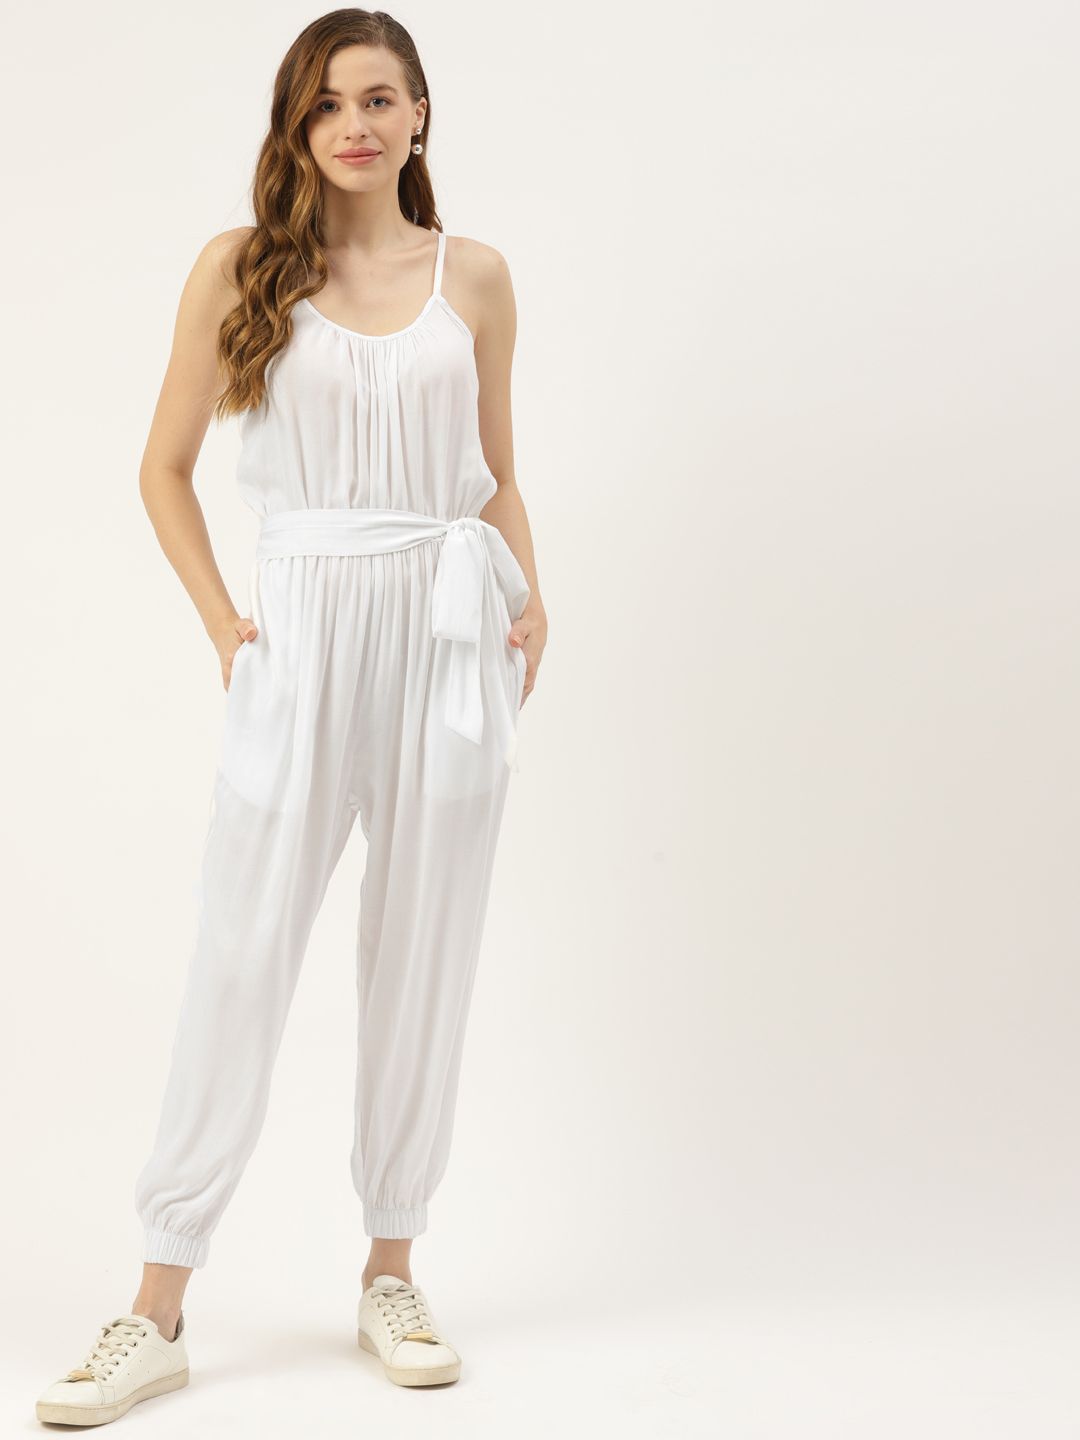 BRINNS White Solid Jogger Jumpsuit with Belt Price in India